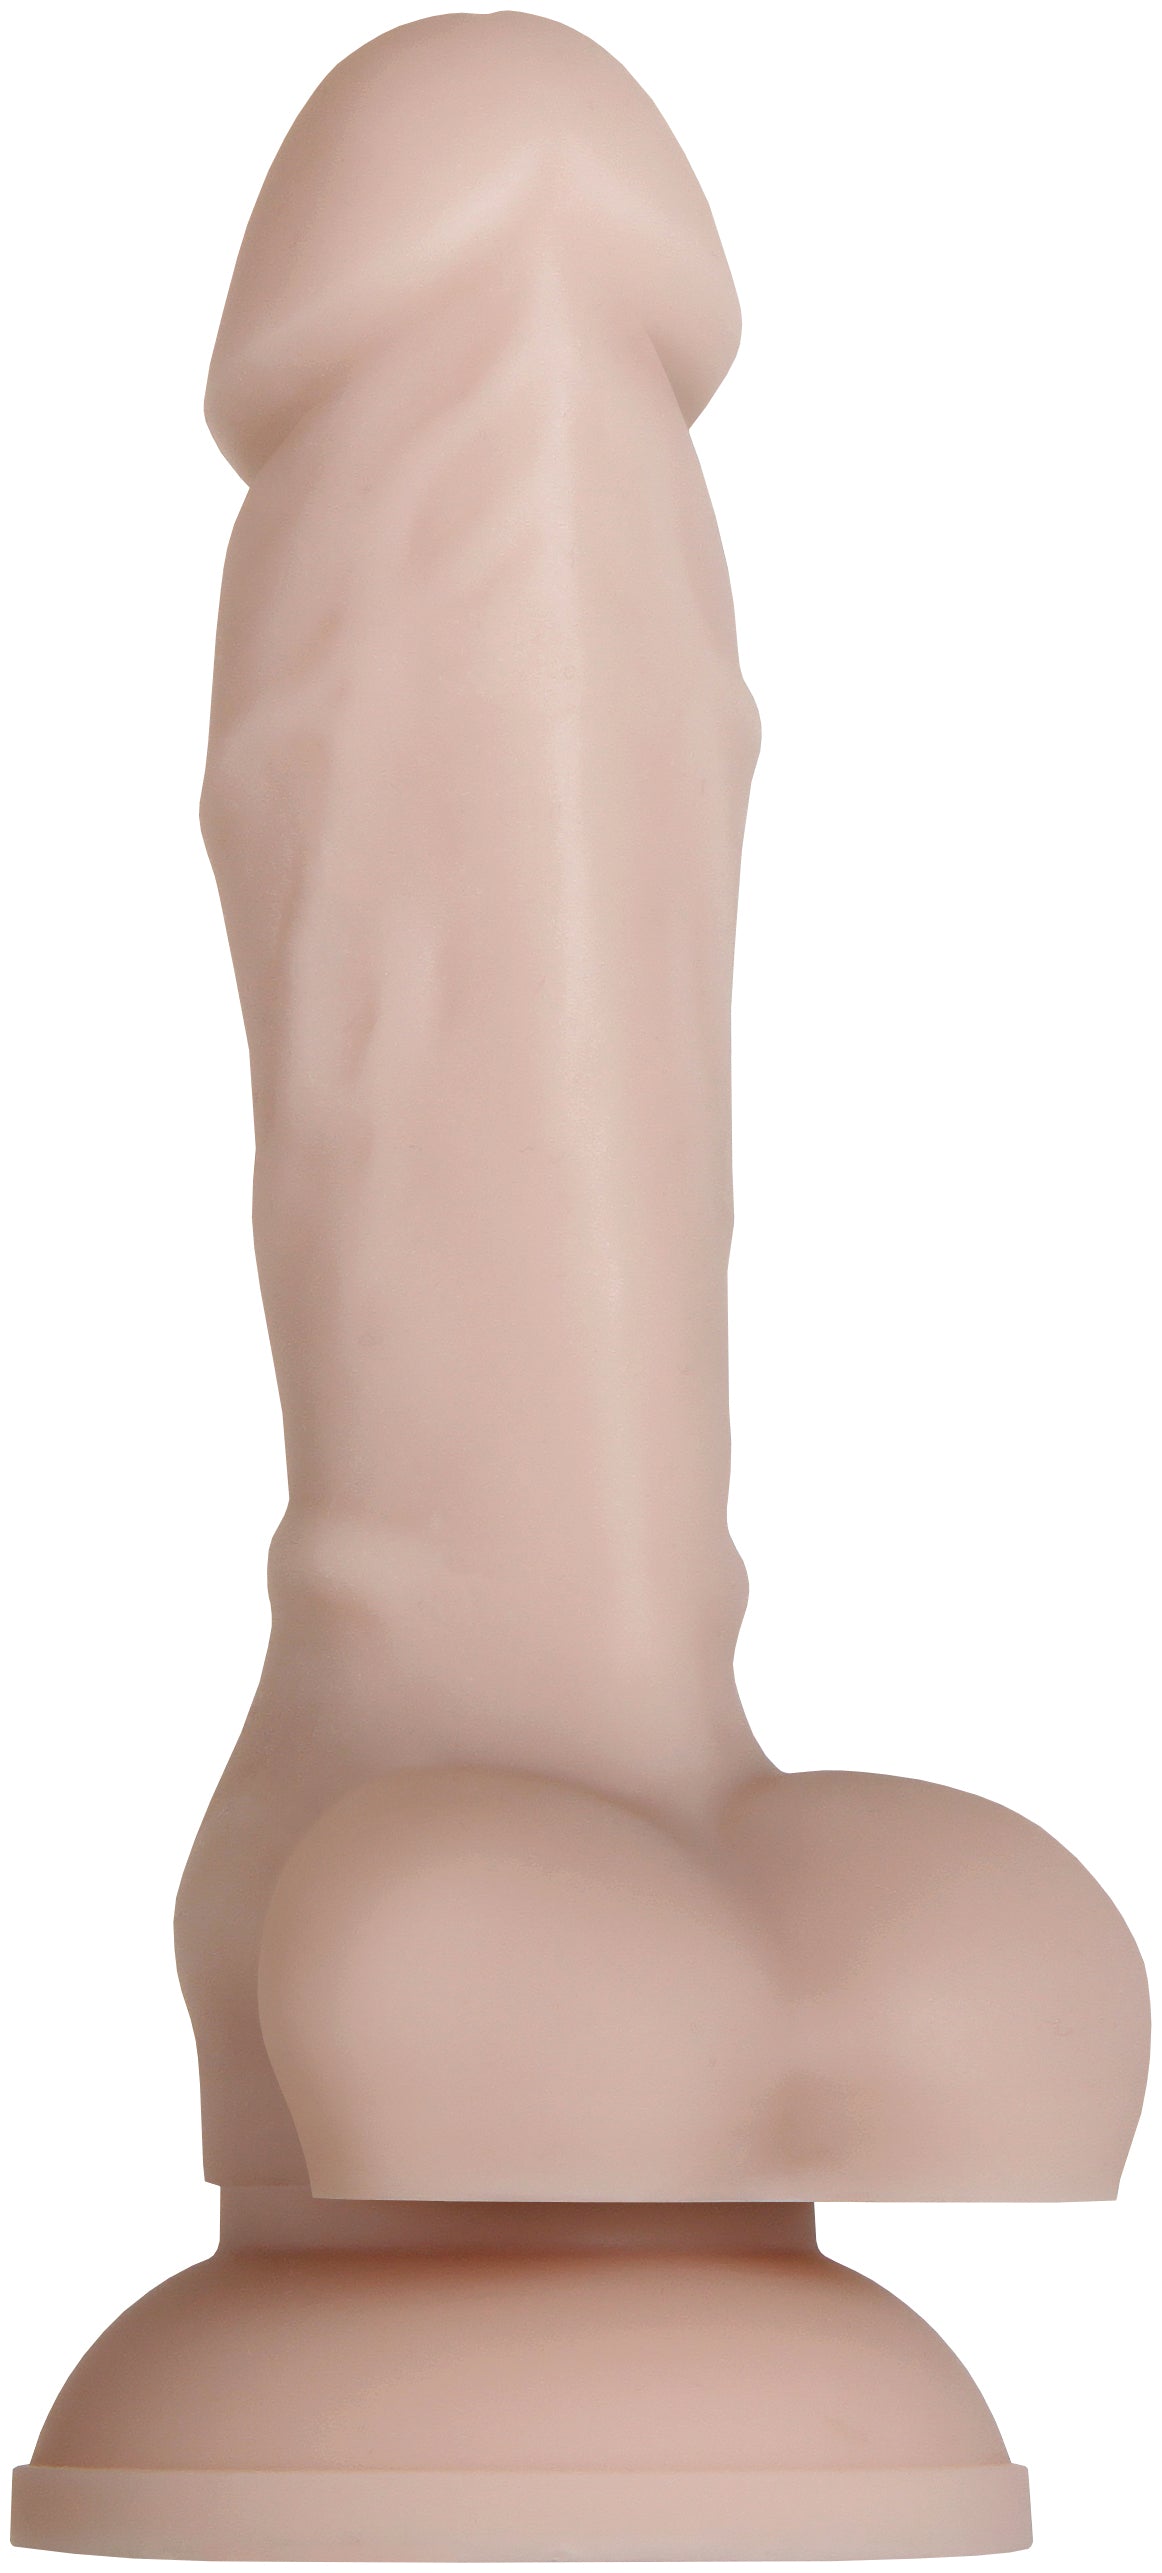 Evolved Real Supple Silicone Poseable Shaft